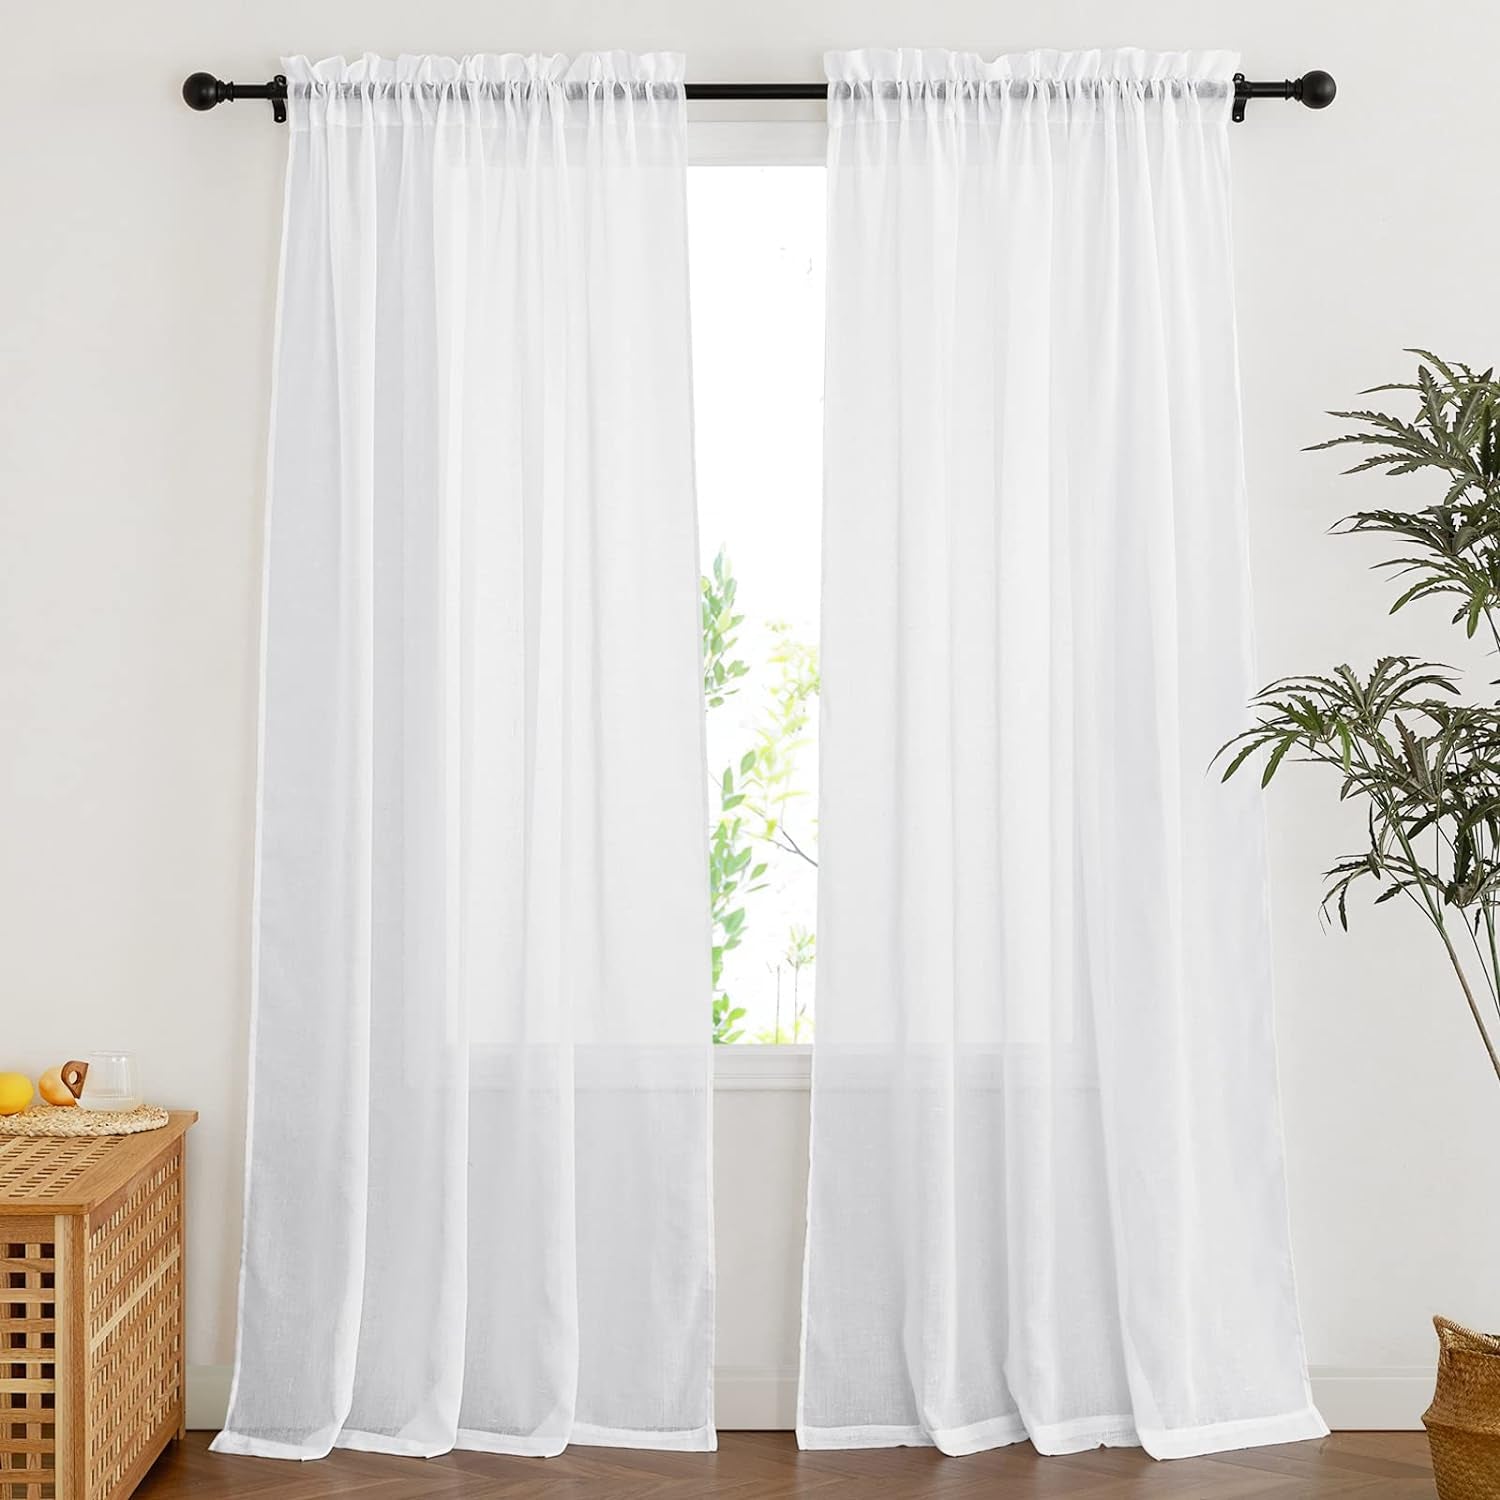 NICETOWN Semi Sheer White Curtains 84 Inch Long, Rod Pocket Sheer Linen Curtains & Drapes Balance Privacy & Light Panels for Bedroom/Living Room, W52 X L84, 2 Panels  NICETOWN   